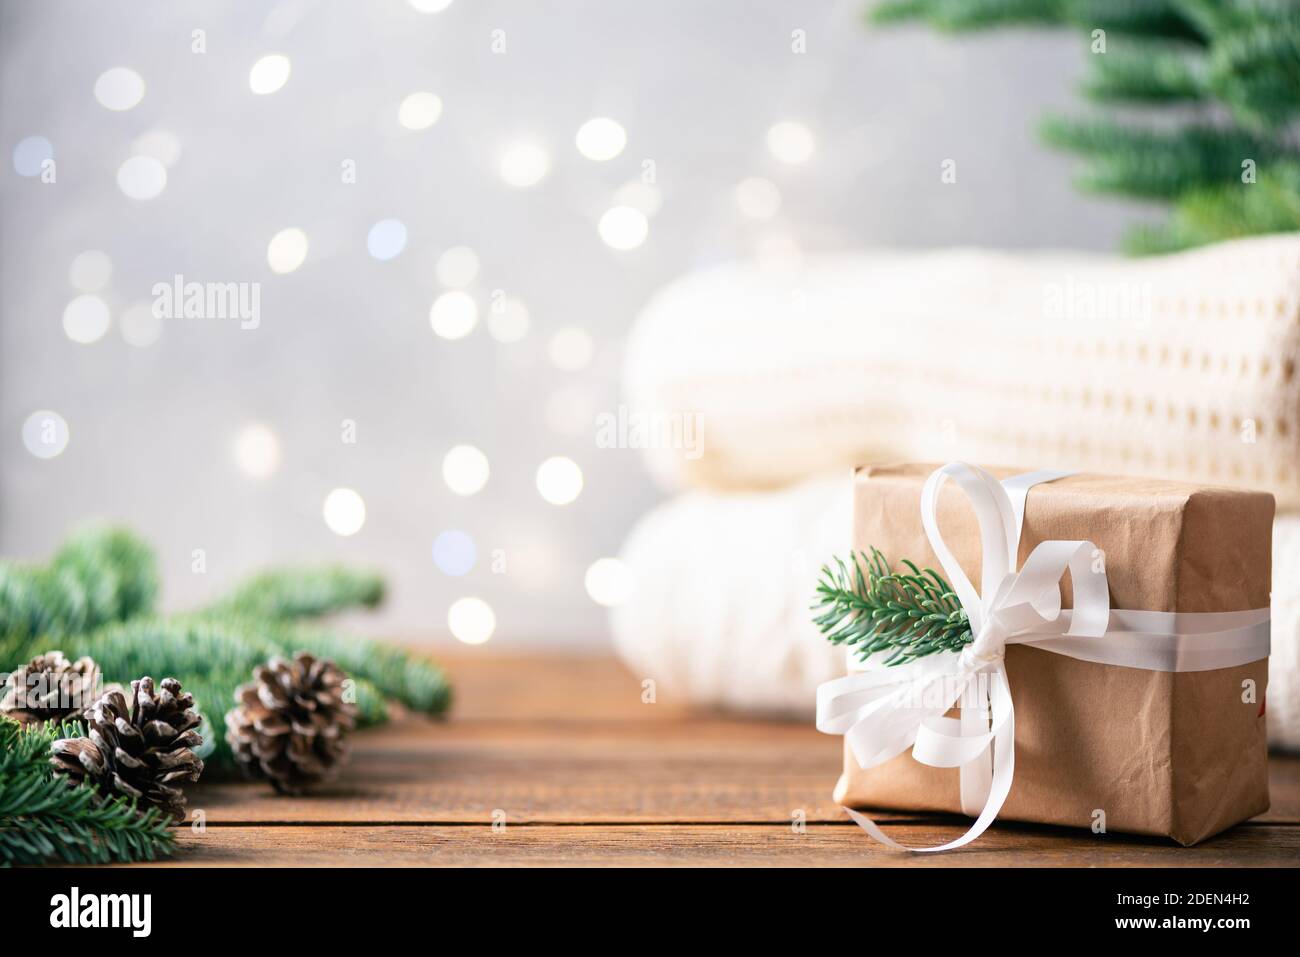 Christmas background with Christmas tree, lights, presents. Copy space Stock Photo